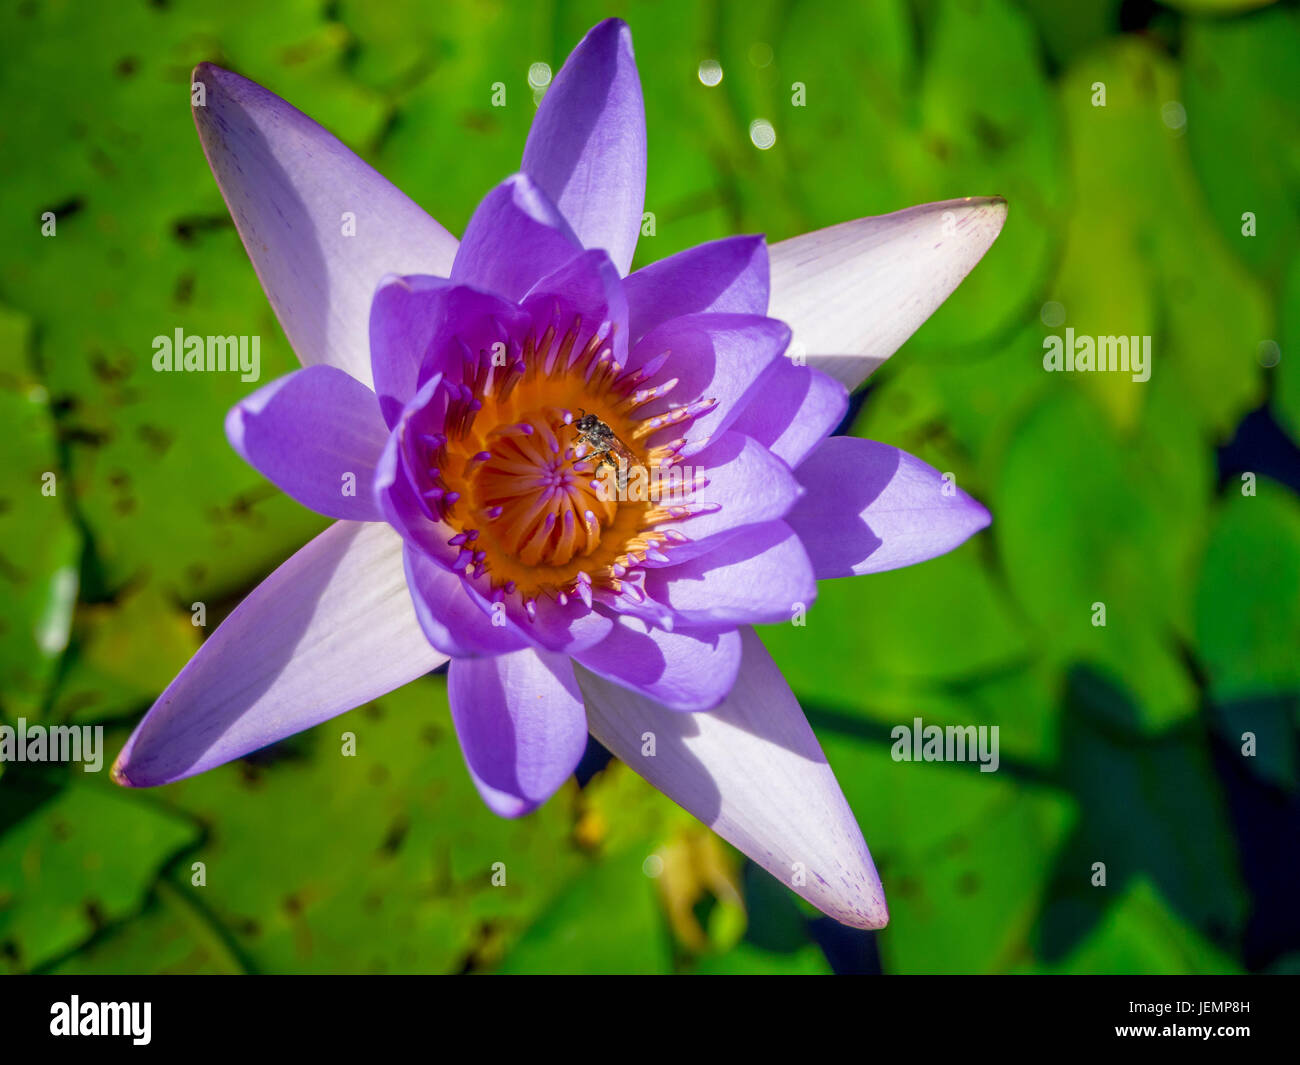 Blooming violet waterlily or lotus in the pond. Stock Photo